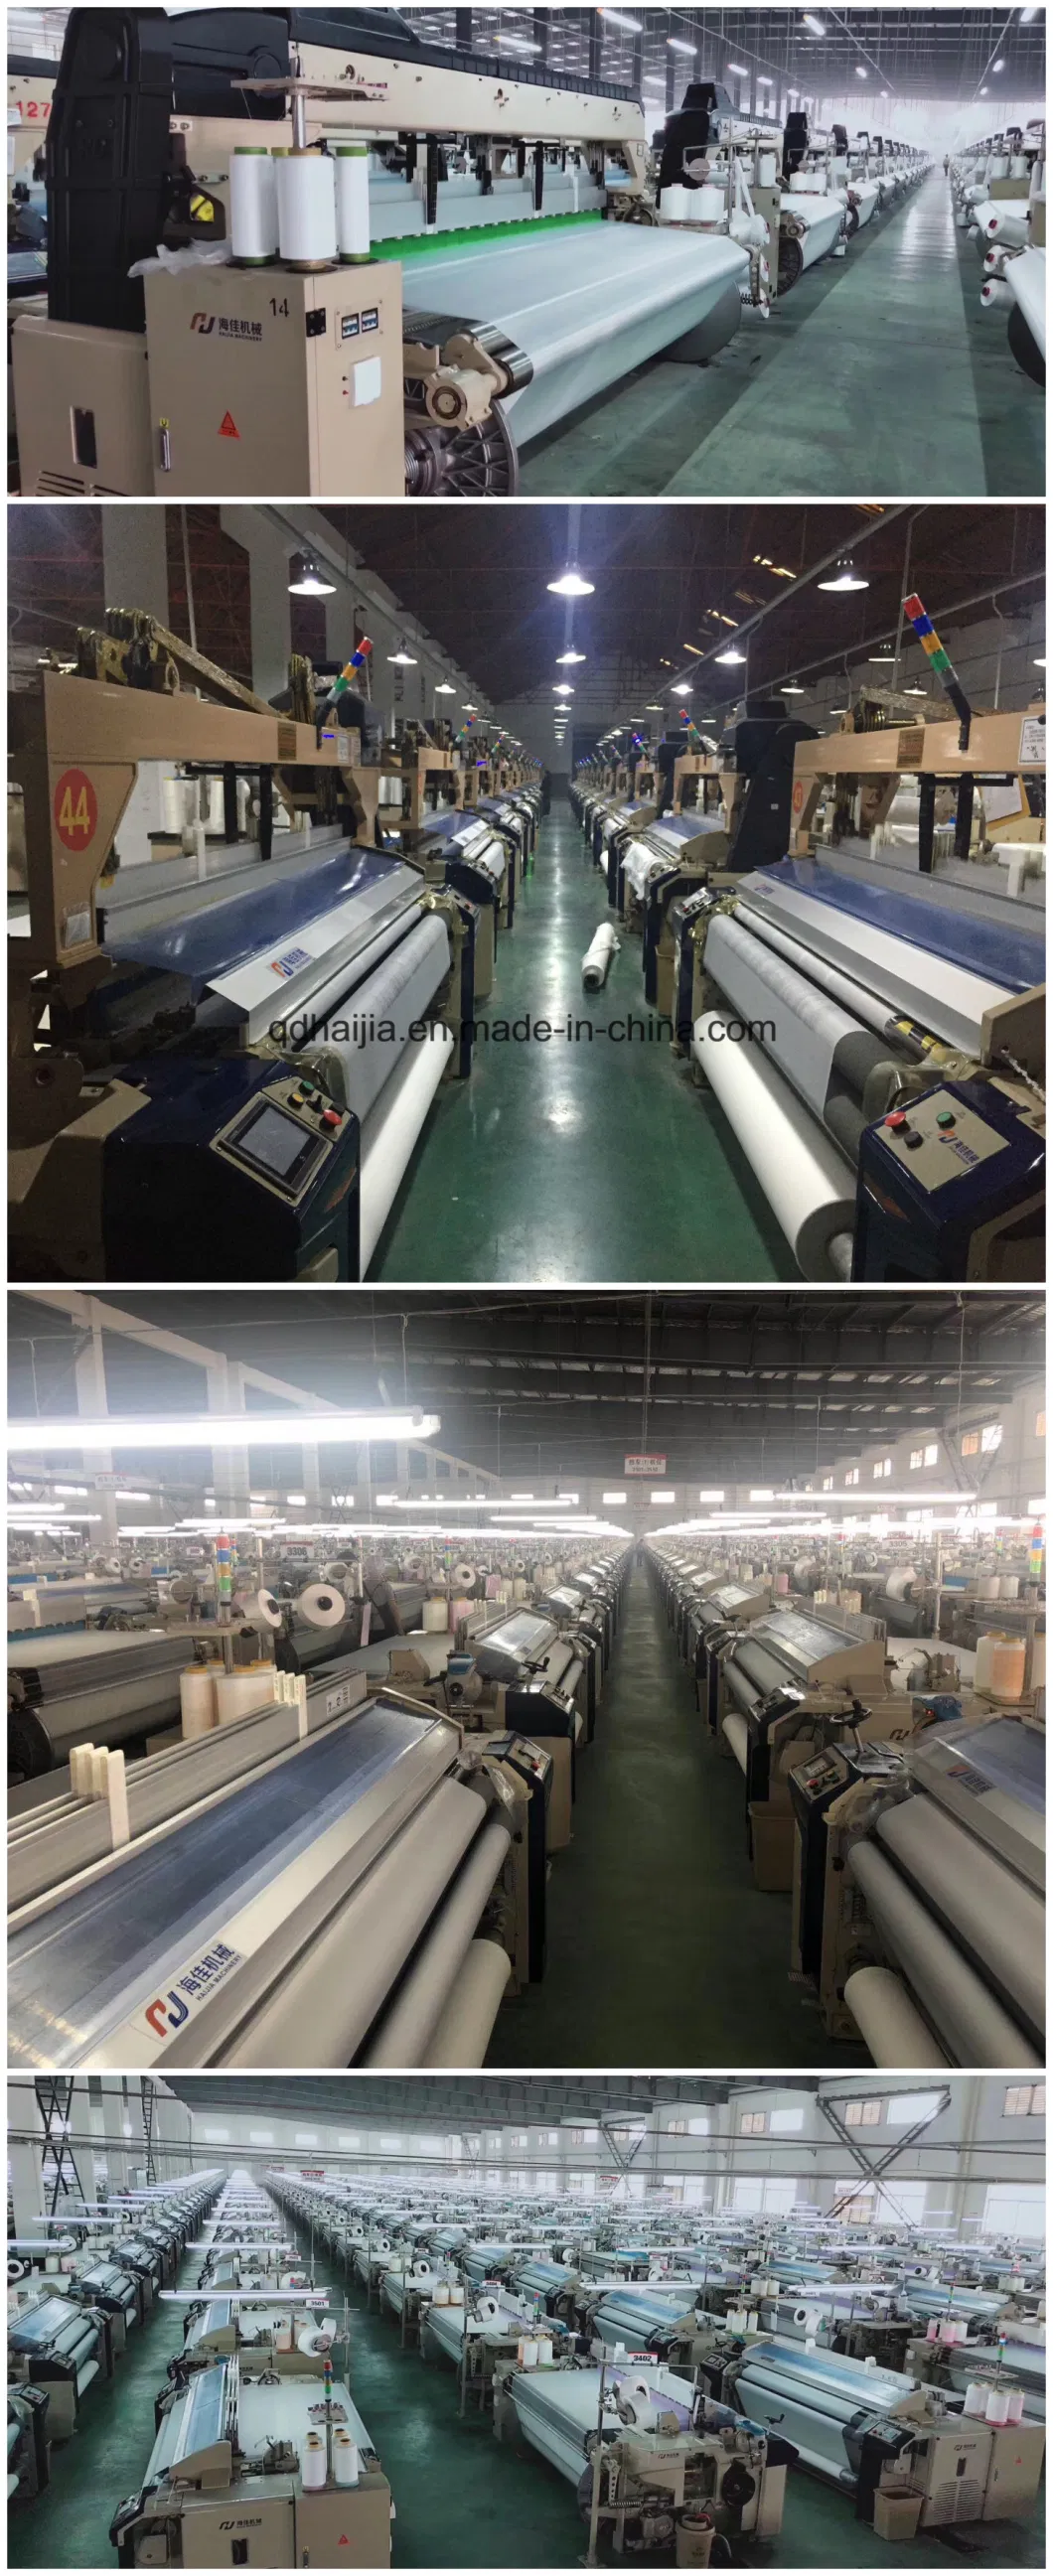 Double Colors Customized Pattern High Speed Air Jet Textile Machine with Cam Shedding for Medical Gauze. (HAN-280)